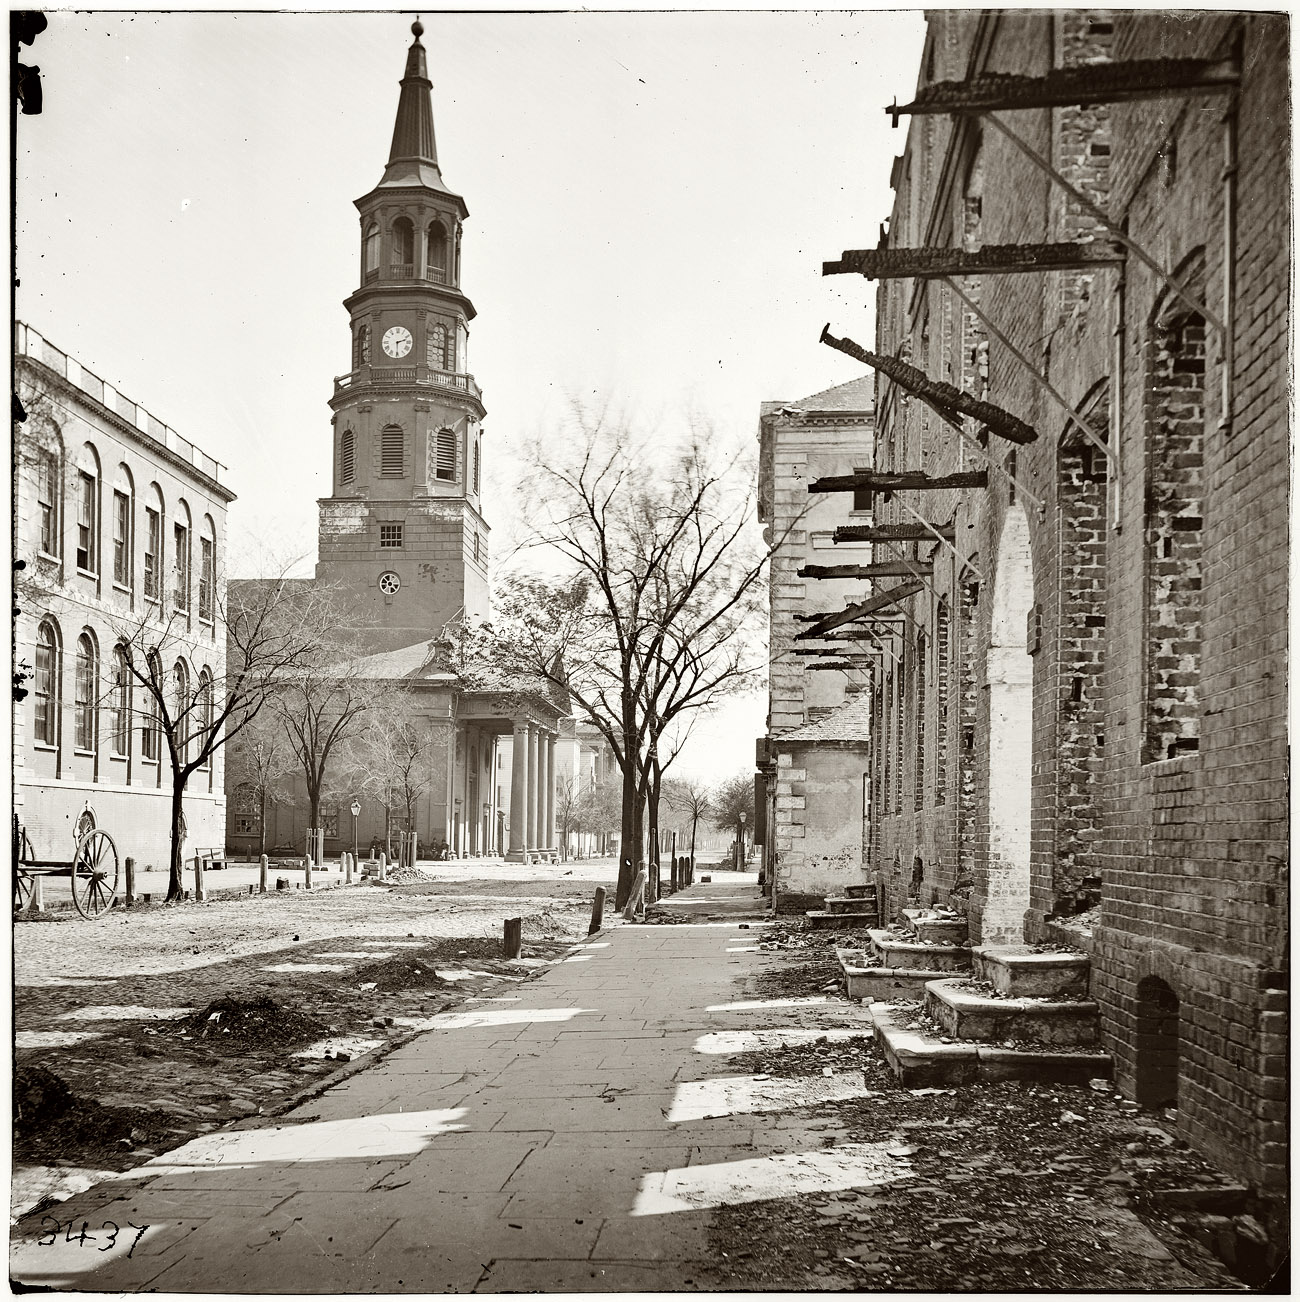 St. Michael's Episcopal Church in Charleston, South Carolina, in 1865 following bombardment of the city during the Civil War. From photographs of the Federal Navy and seaborne expeditions against the Atlantic Coast of the Confederacy, 1863-1865. View full size. Left half of a glass-plate stereograph negative.